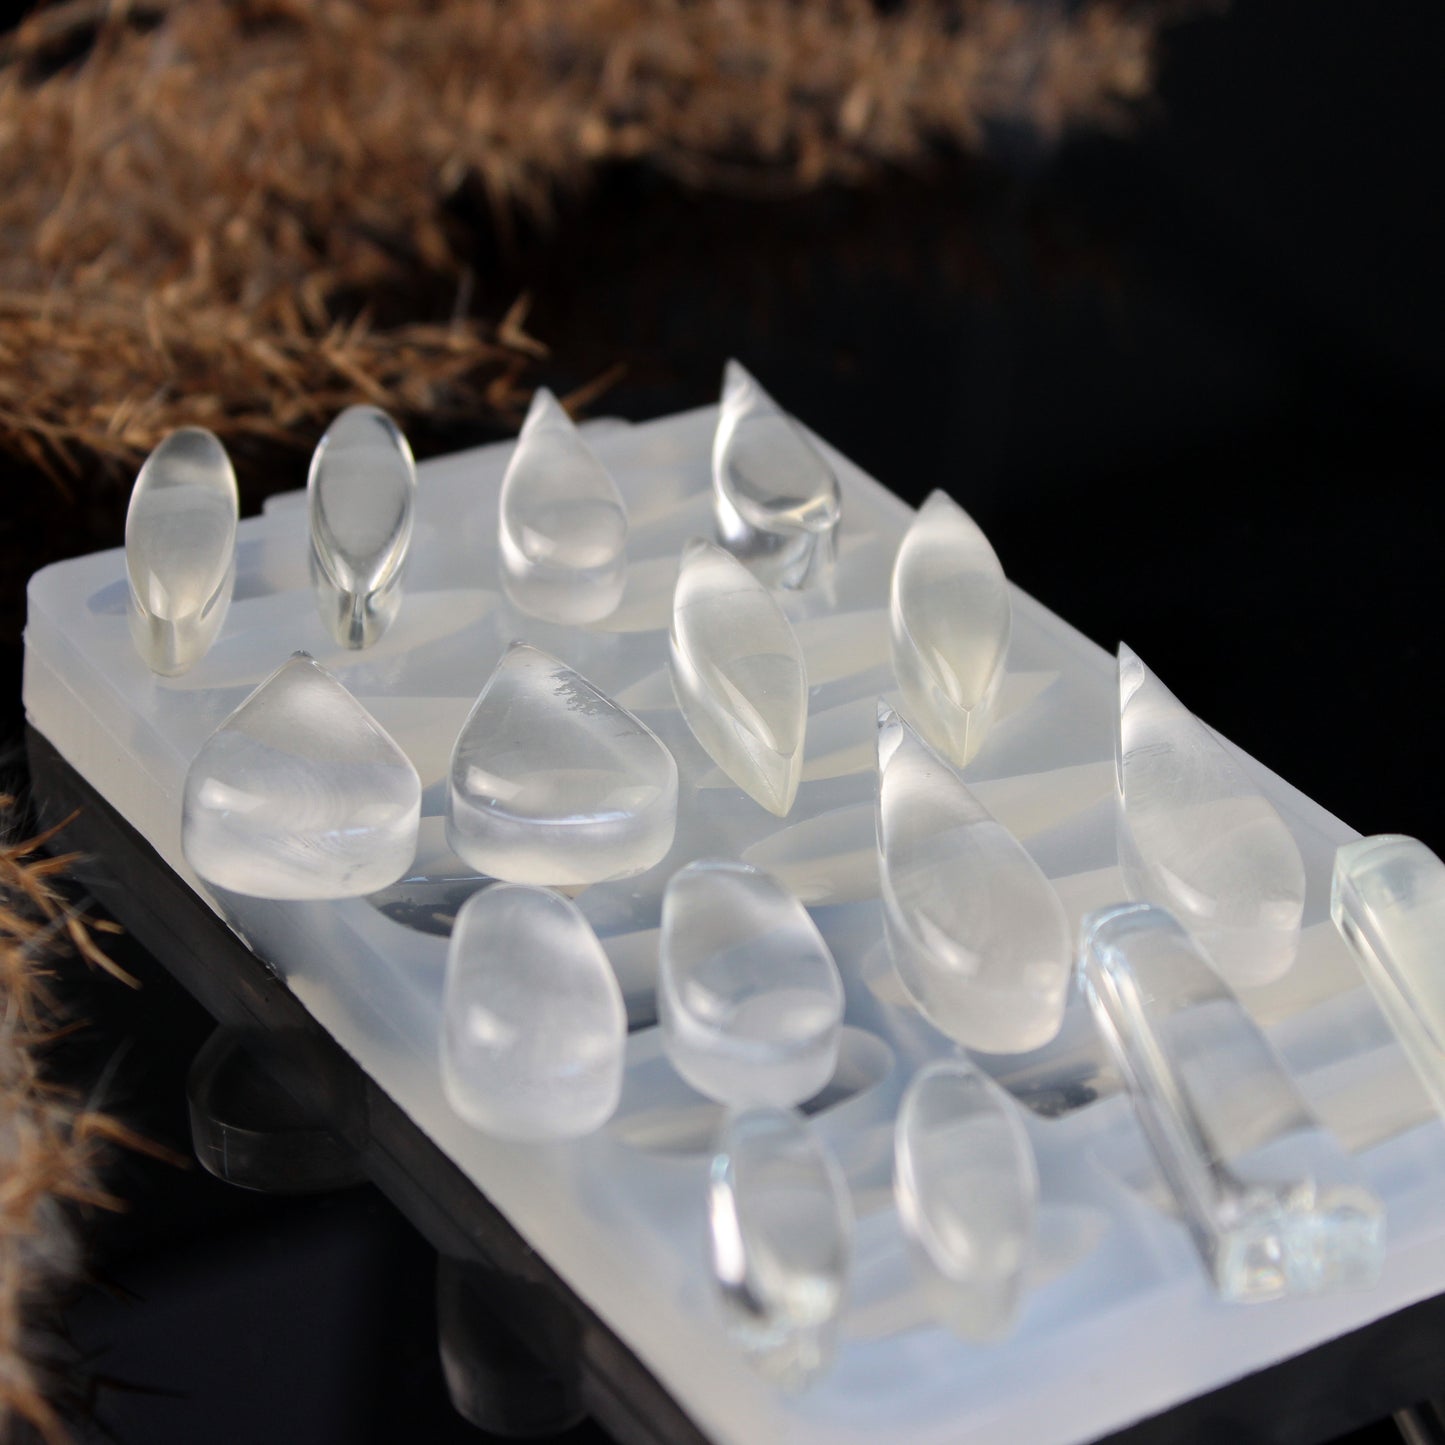 Drops Silicone Resin Mold - 16 in 1